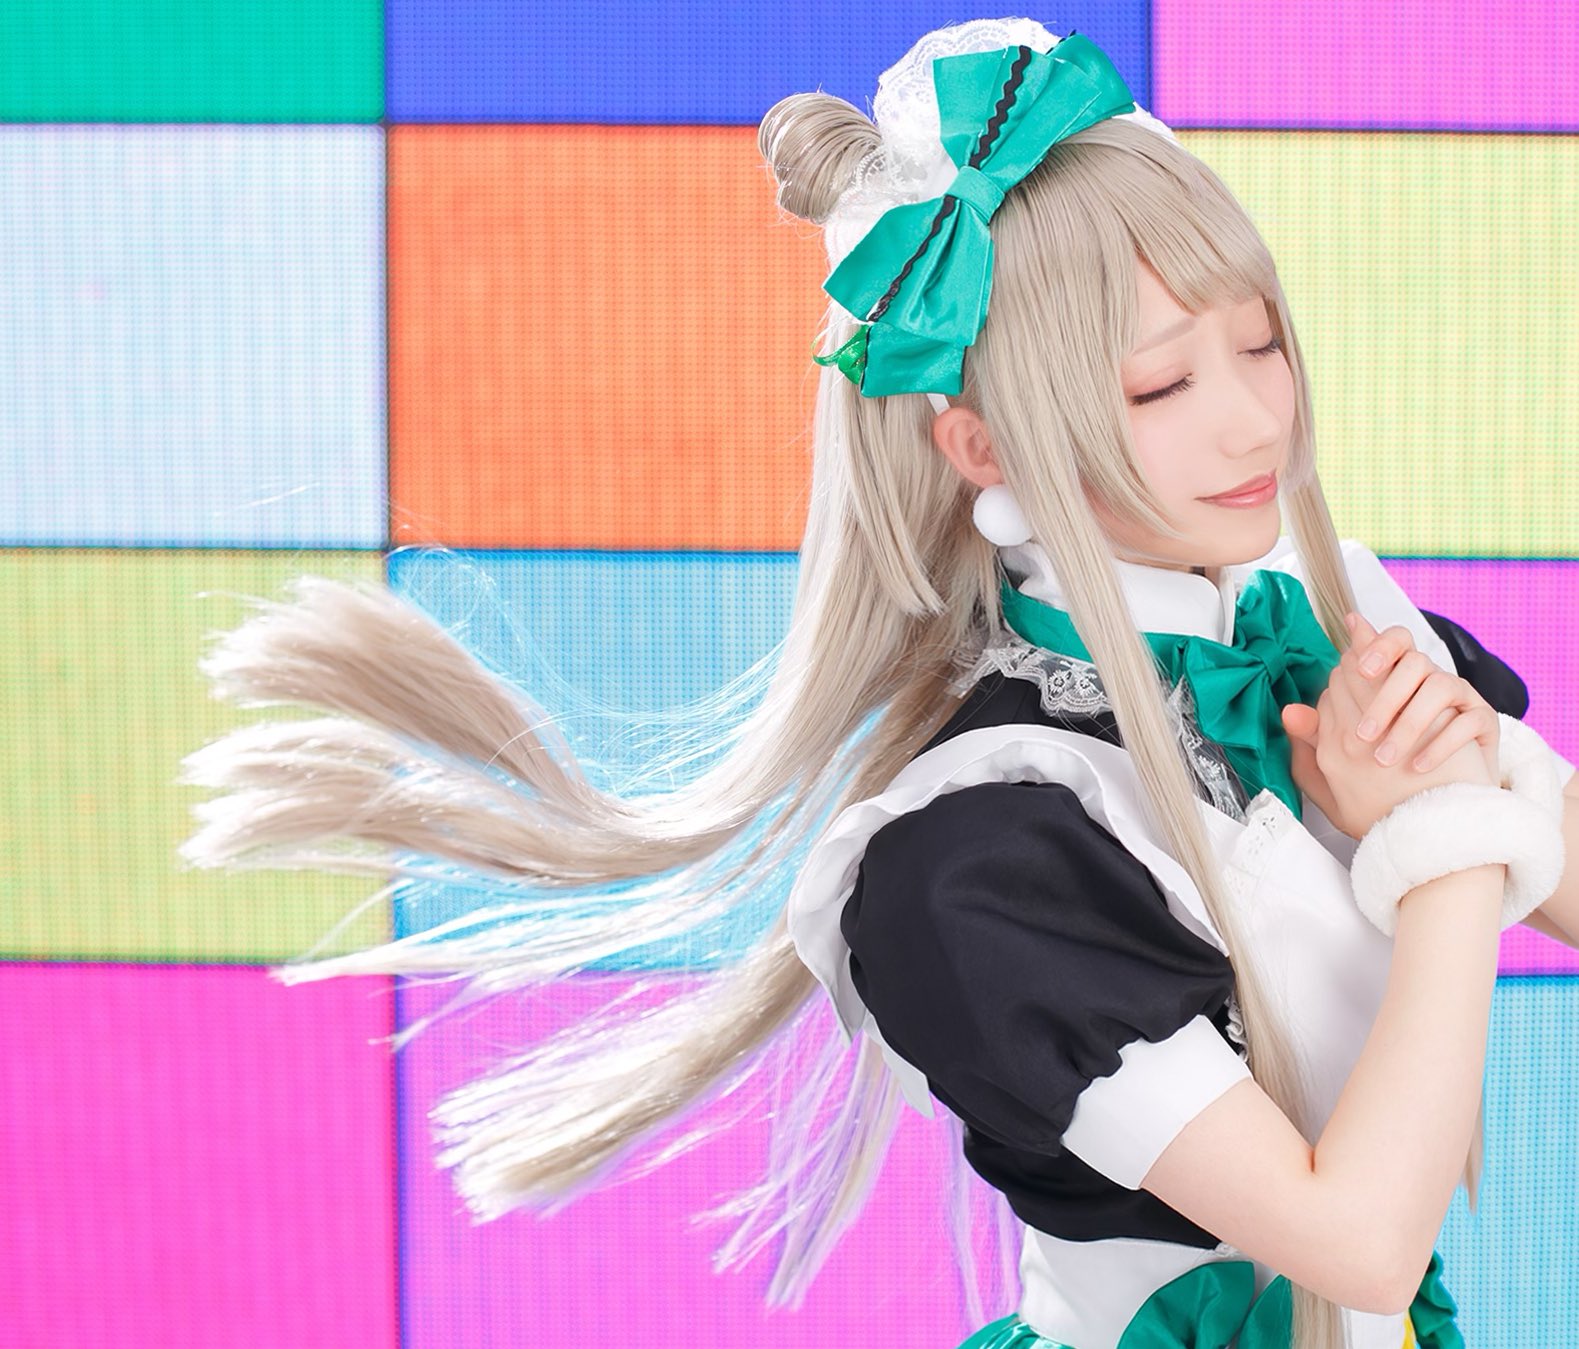 【 WorldCosplay   FEATURE COSPLAYER 】 ☆葵已ねむ さん☆